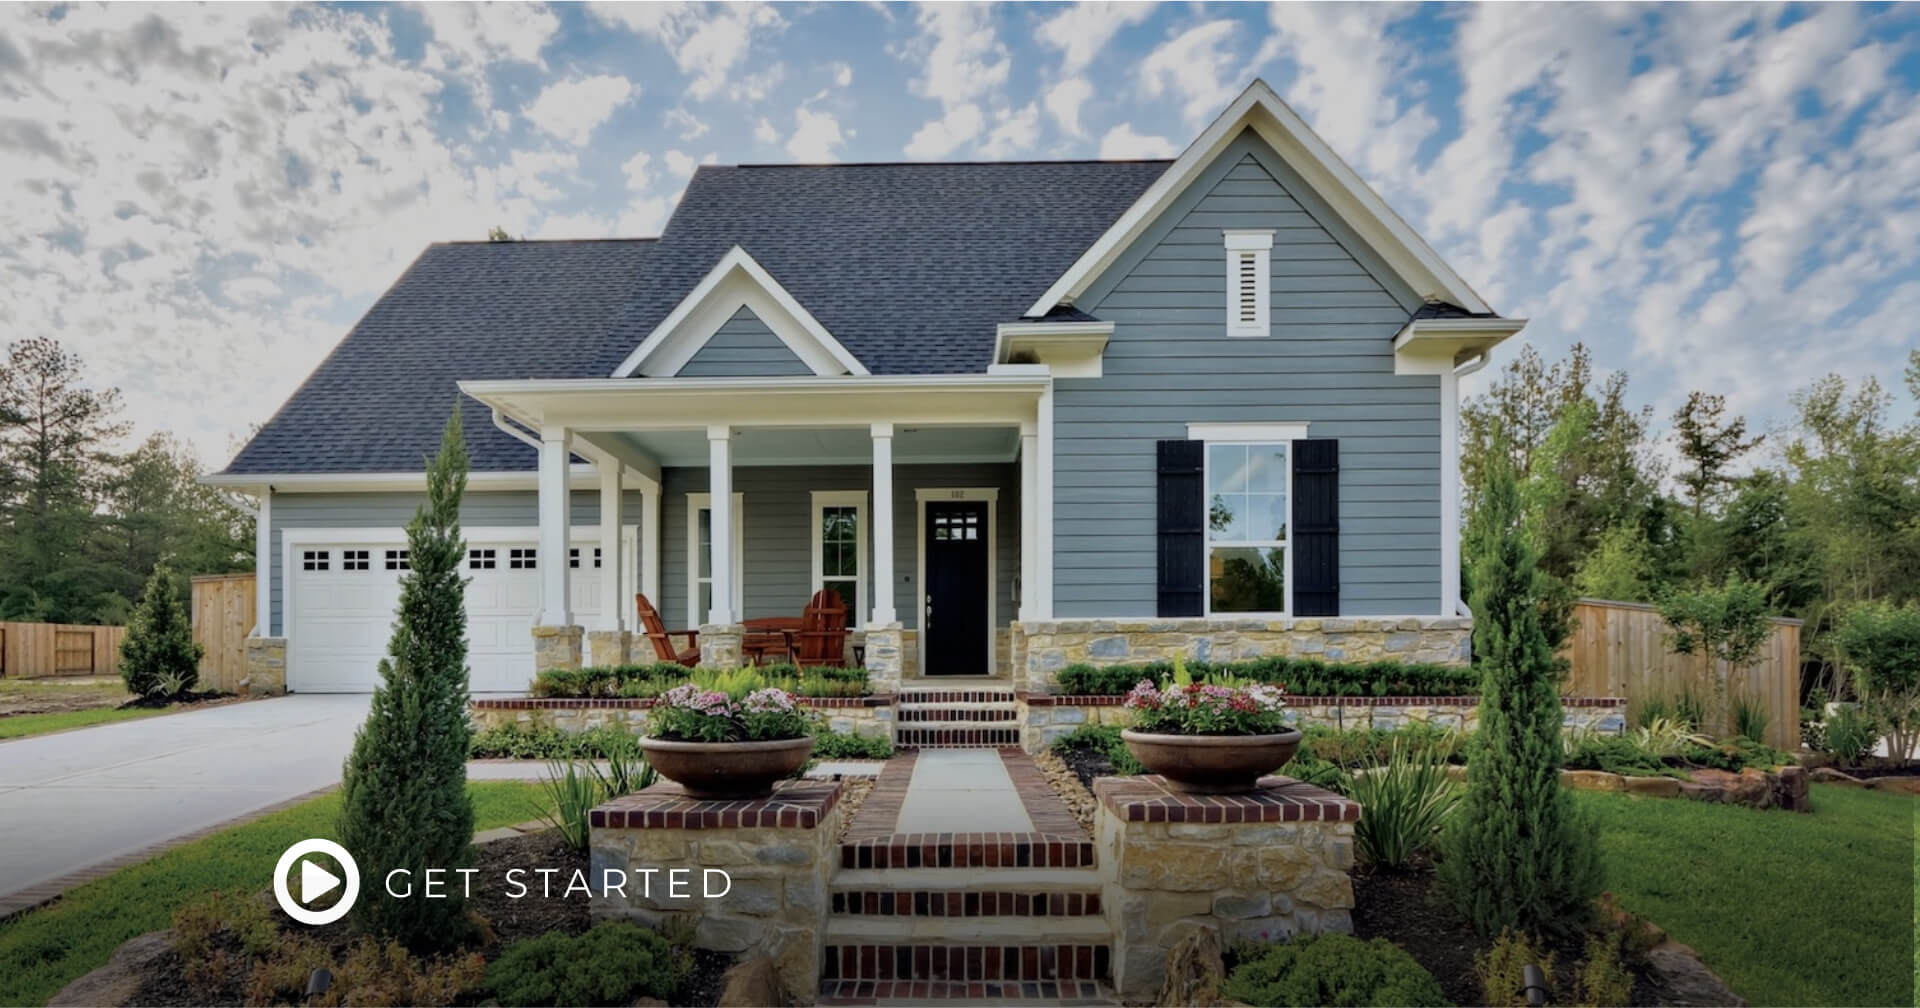 Nealy Homes get-strarted-buy-page Buy  